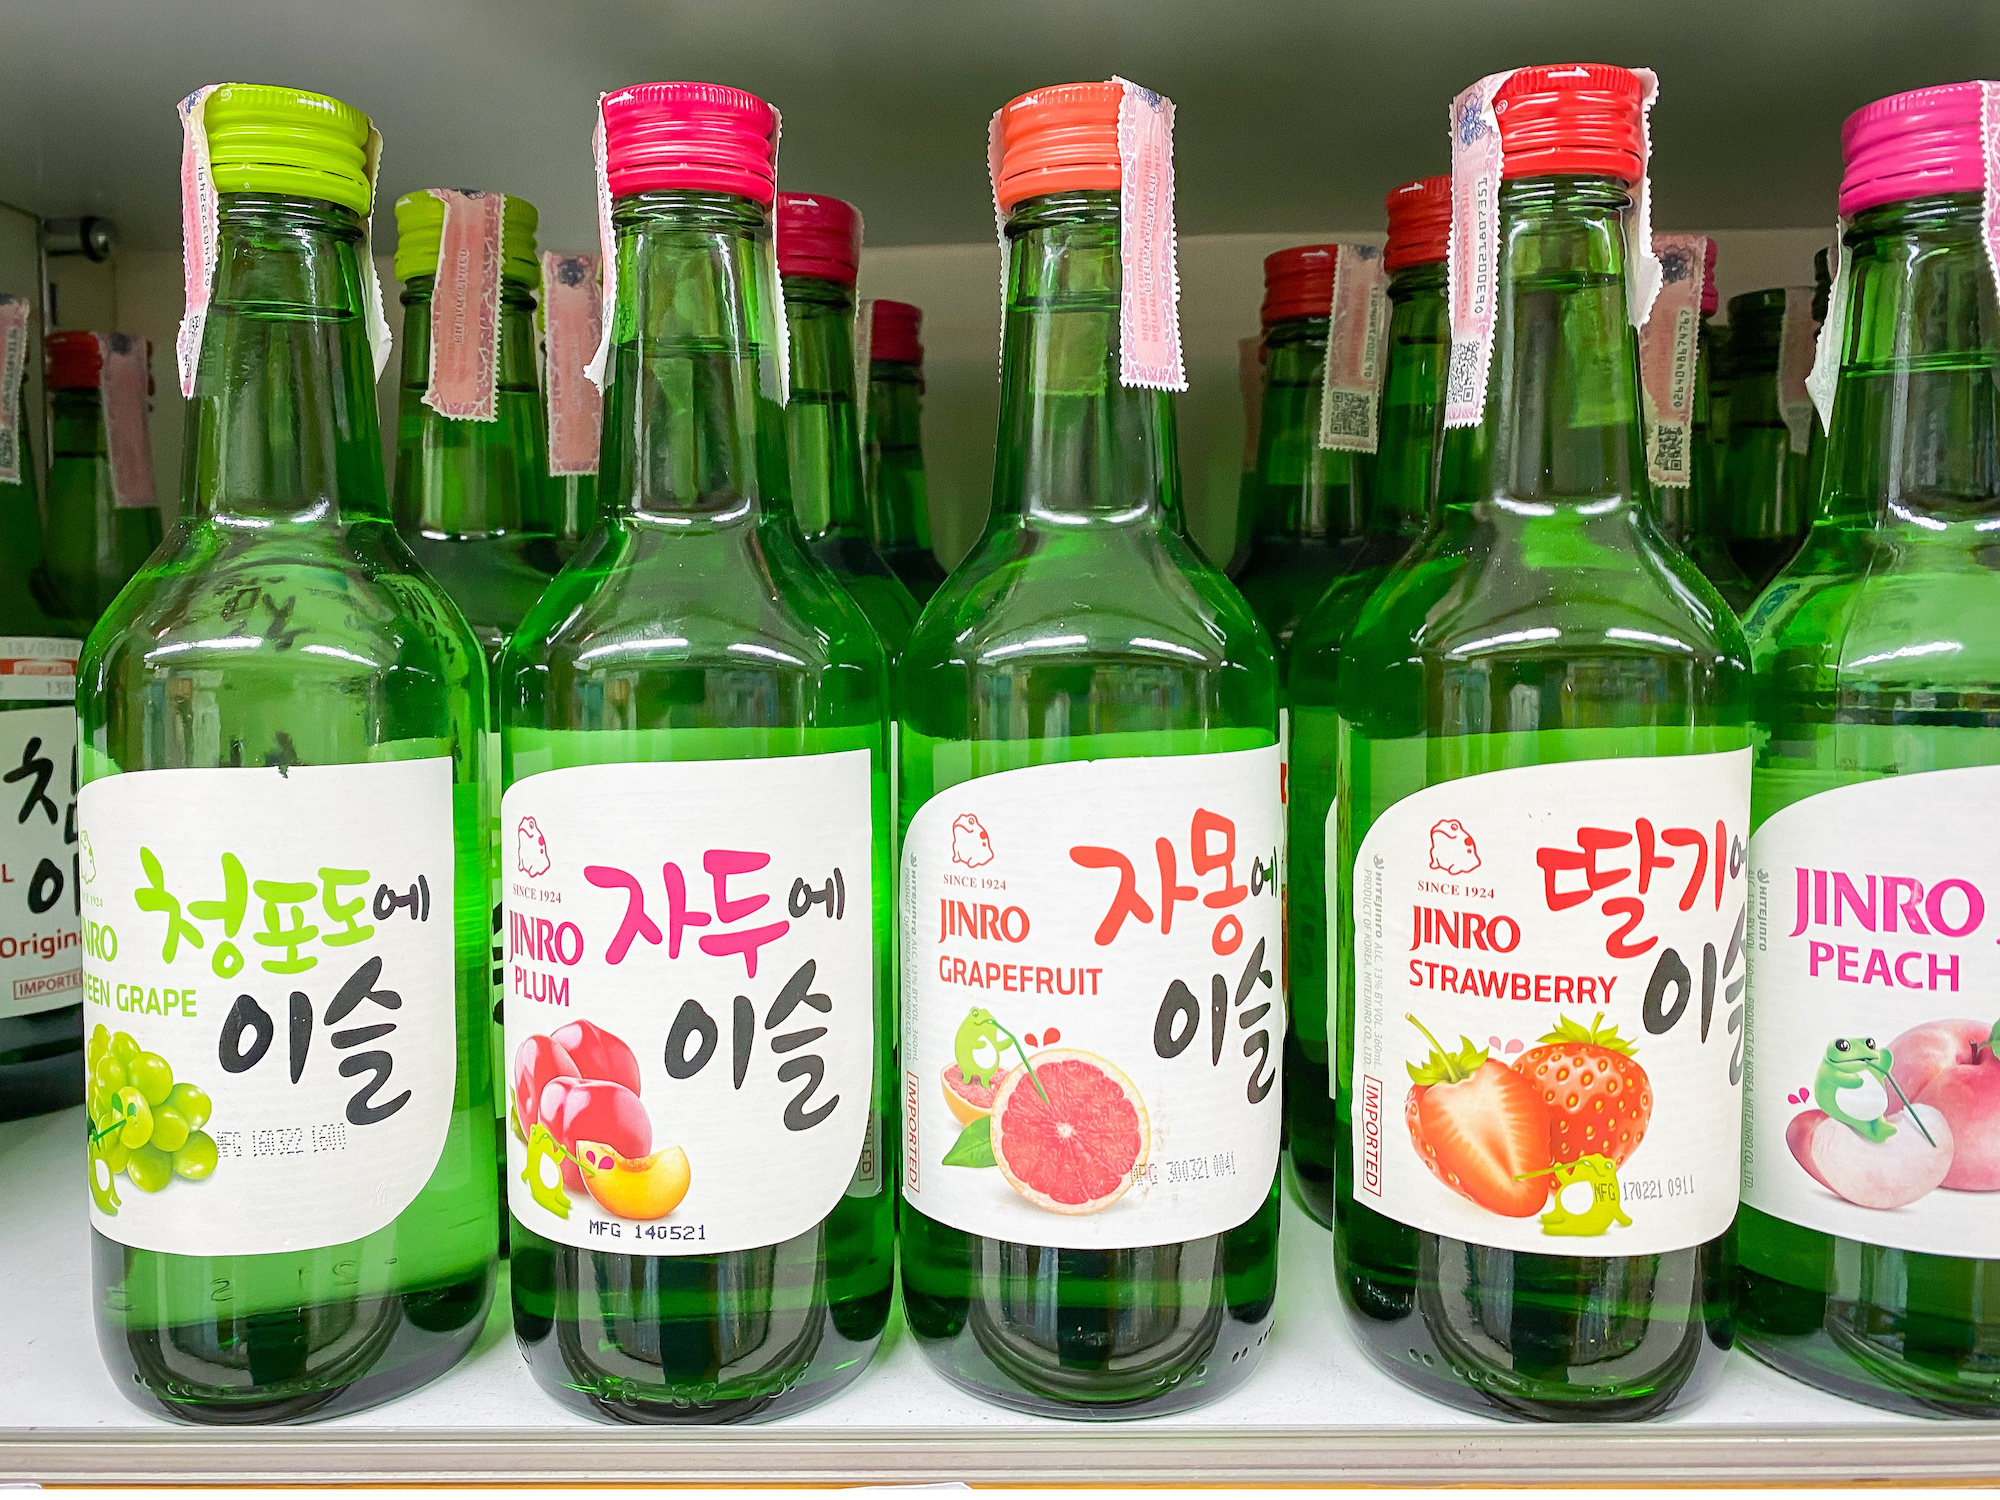 Soju goes beyond the little green bottle: Korea is known for this